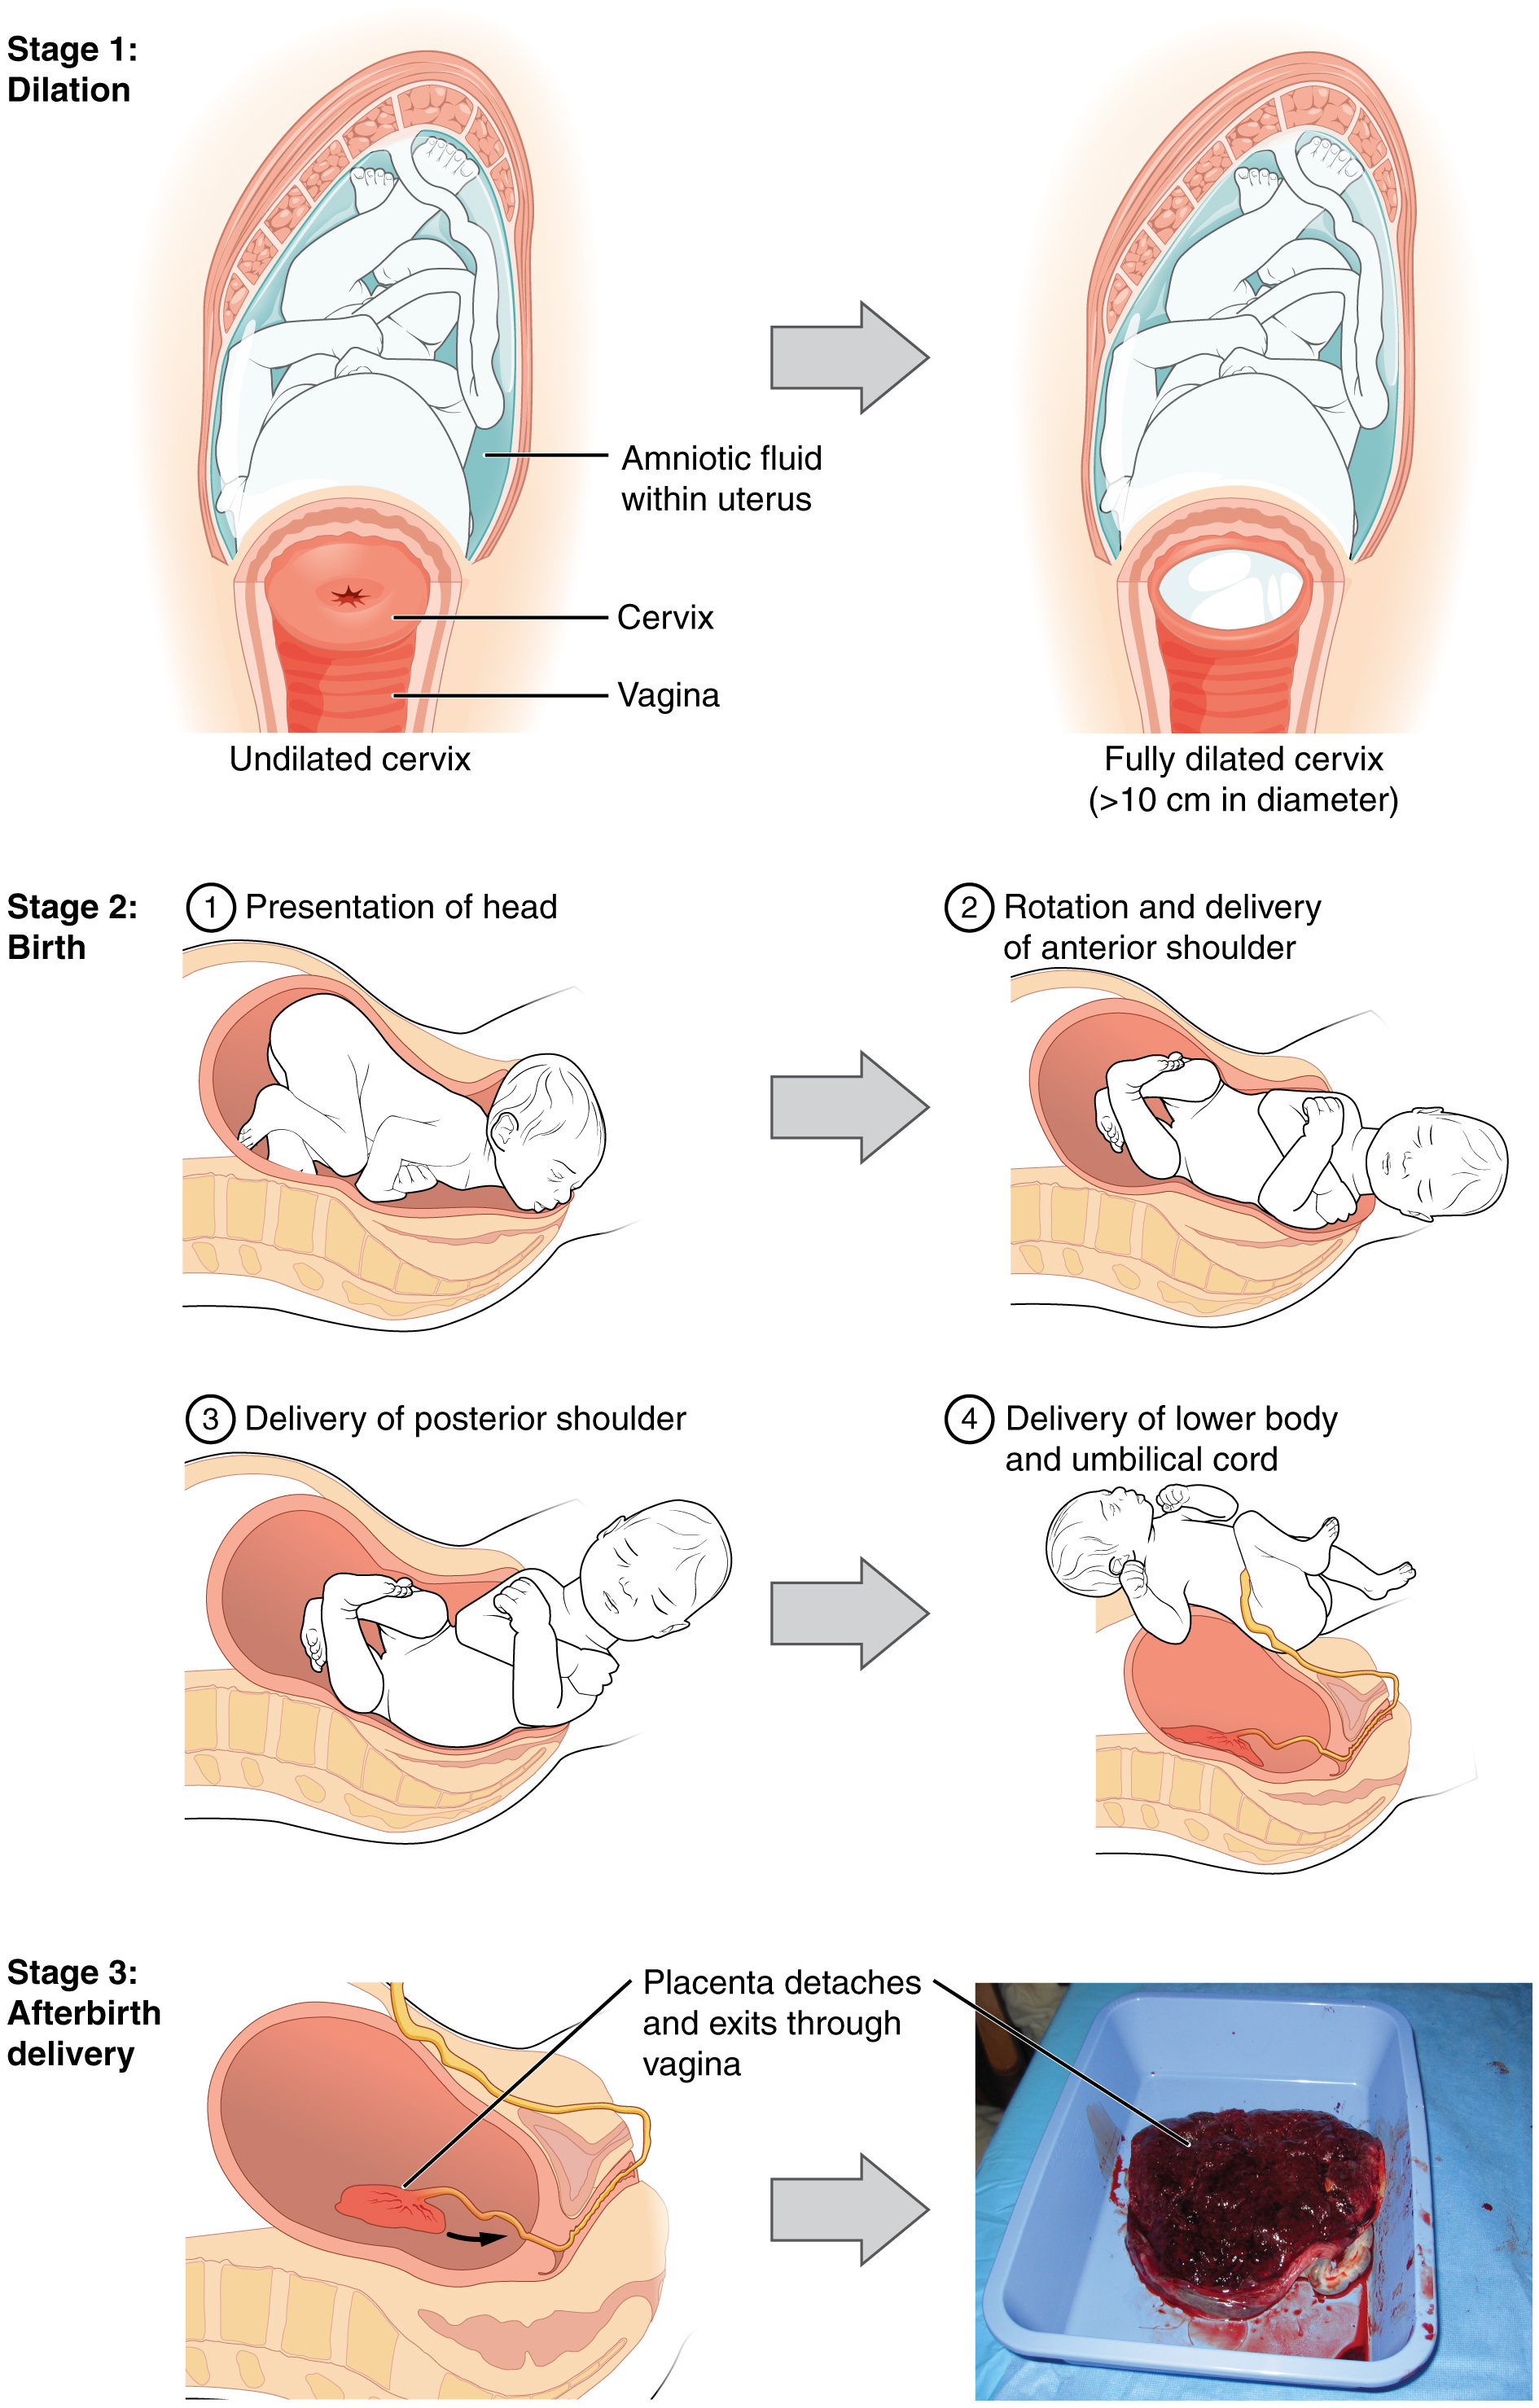 Stages of Childbirth